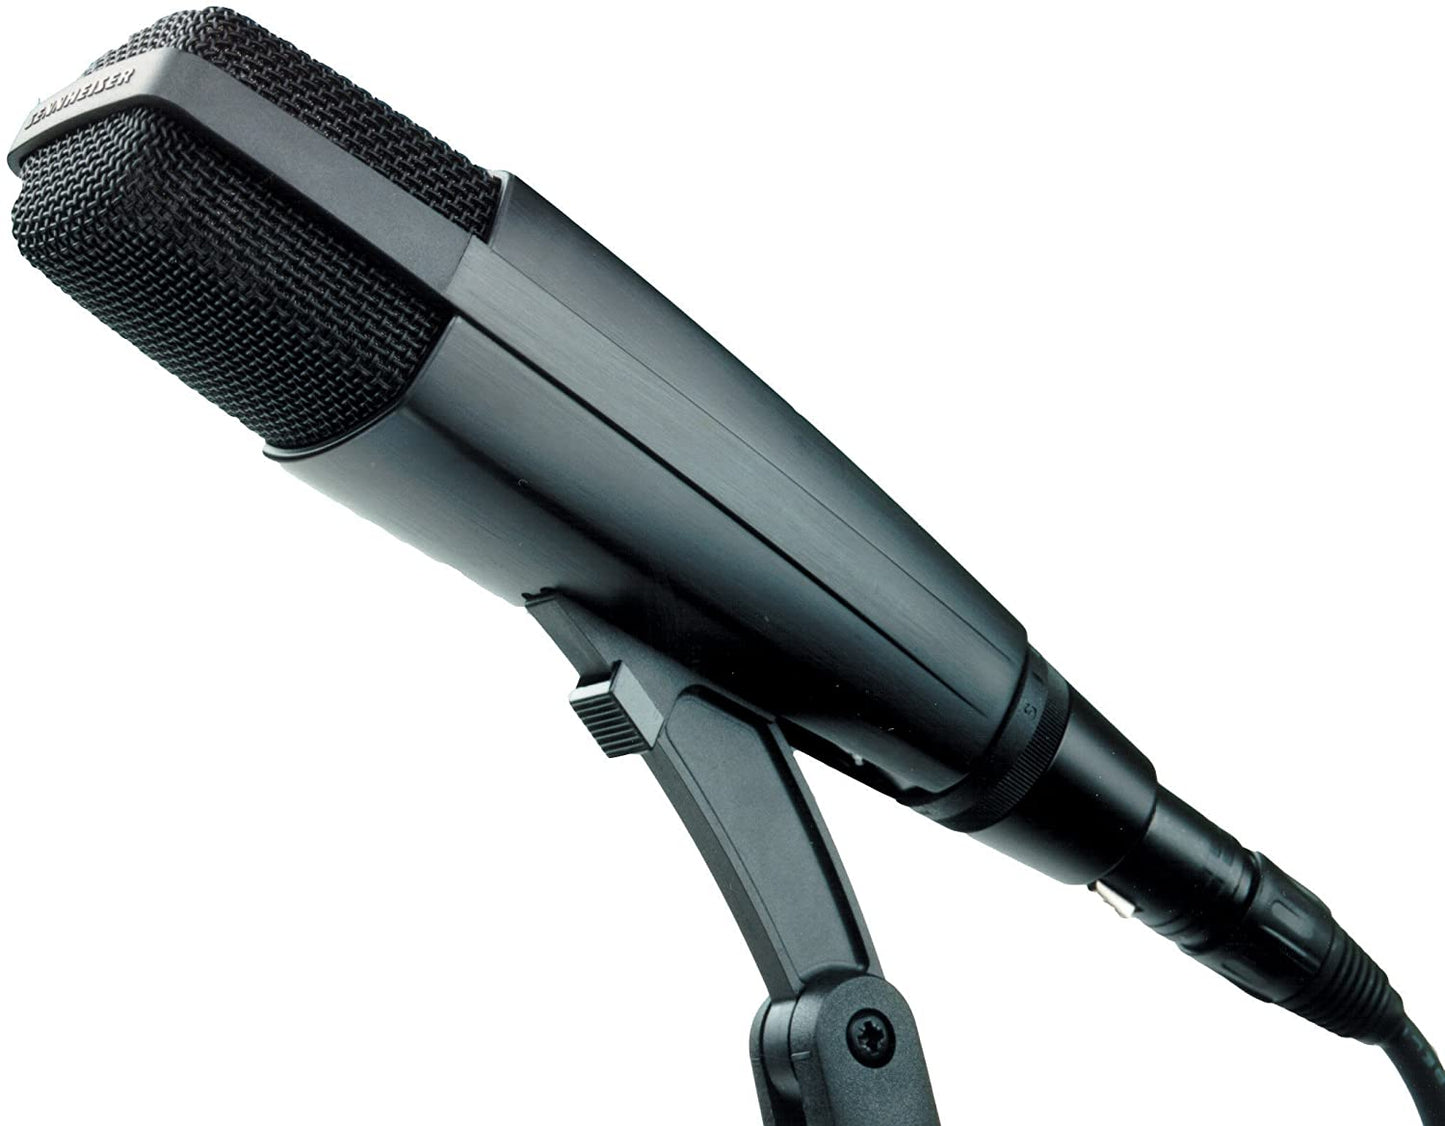 Sennheiser MD 421-II Cardioid Dynamic Microphone with Lock-On Stand Adapter 5-Position Bass Roll-Off